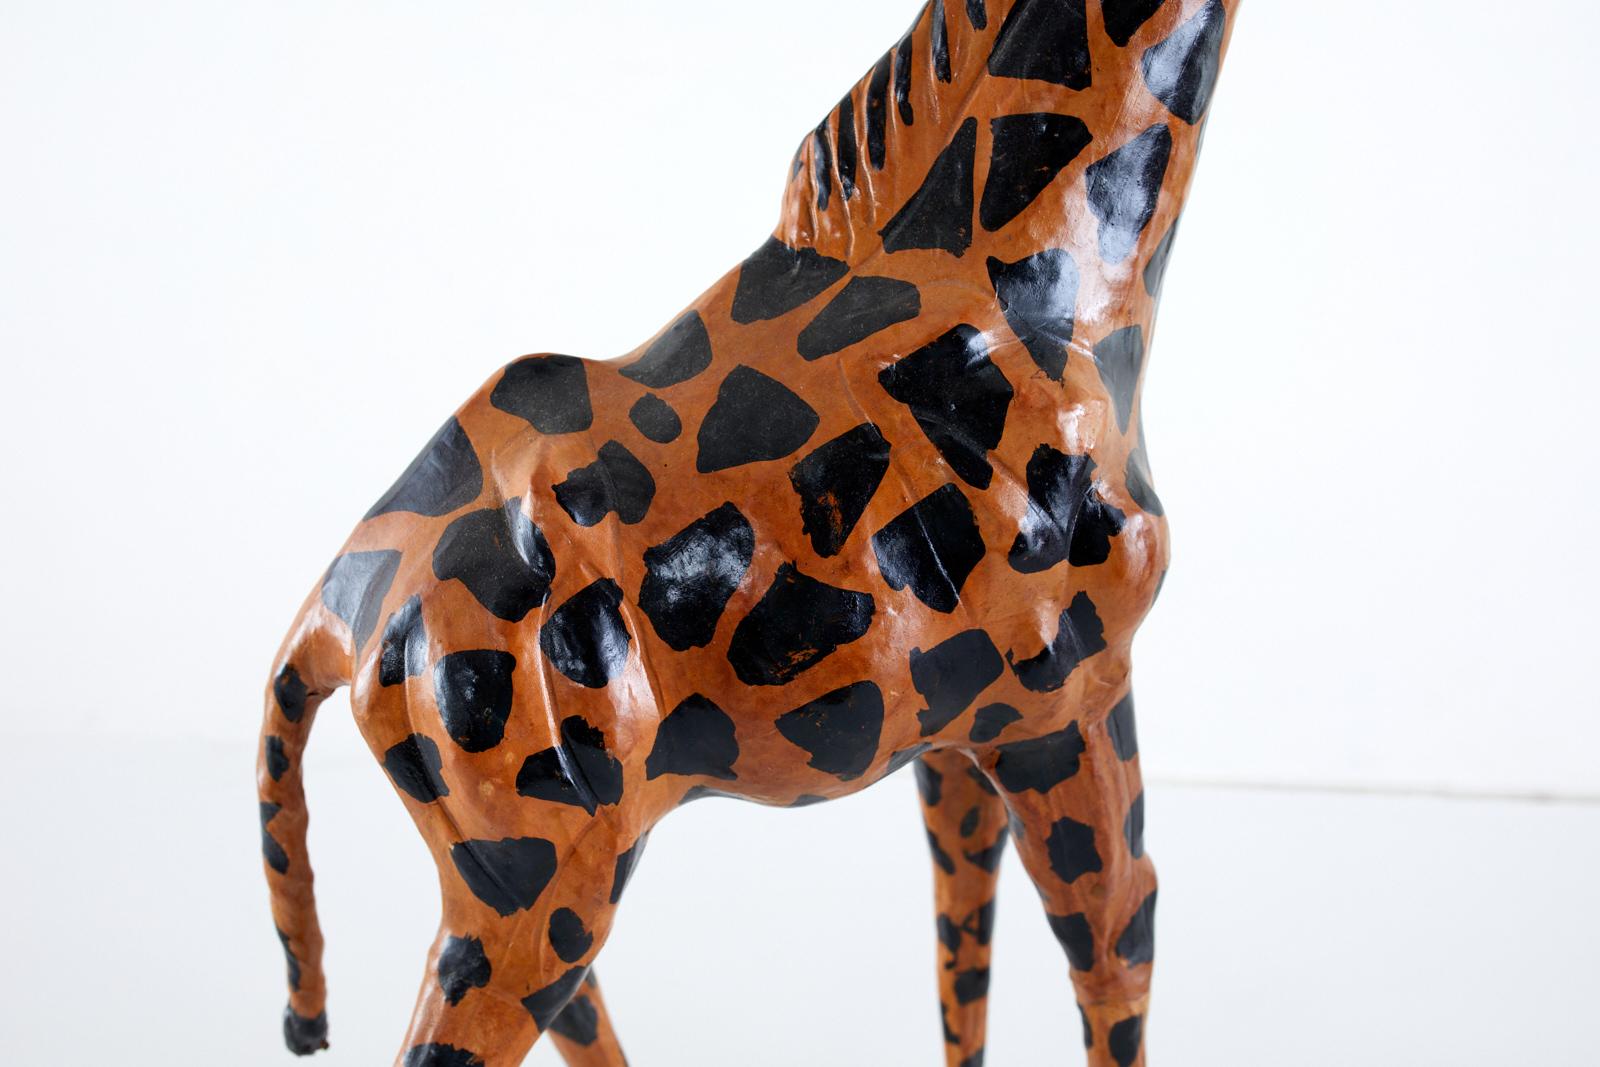 Indian Pair of Painted Leather Giraffe Sculptures For Sale